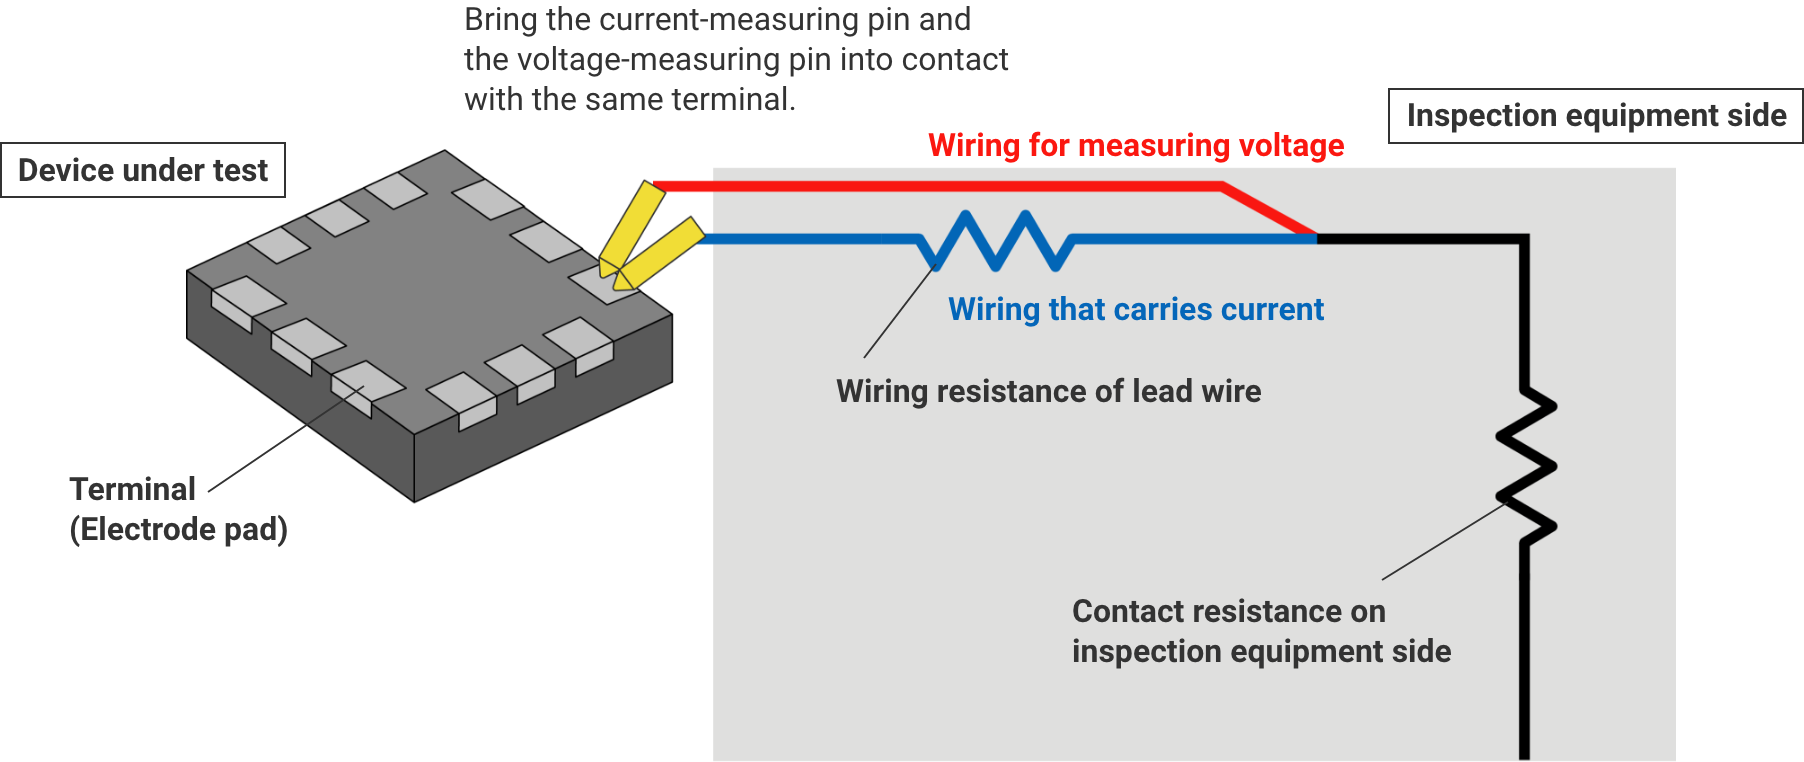 Bring the current-measuring pin and the voltage-measuring pin into contact with the same terminal.